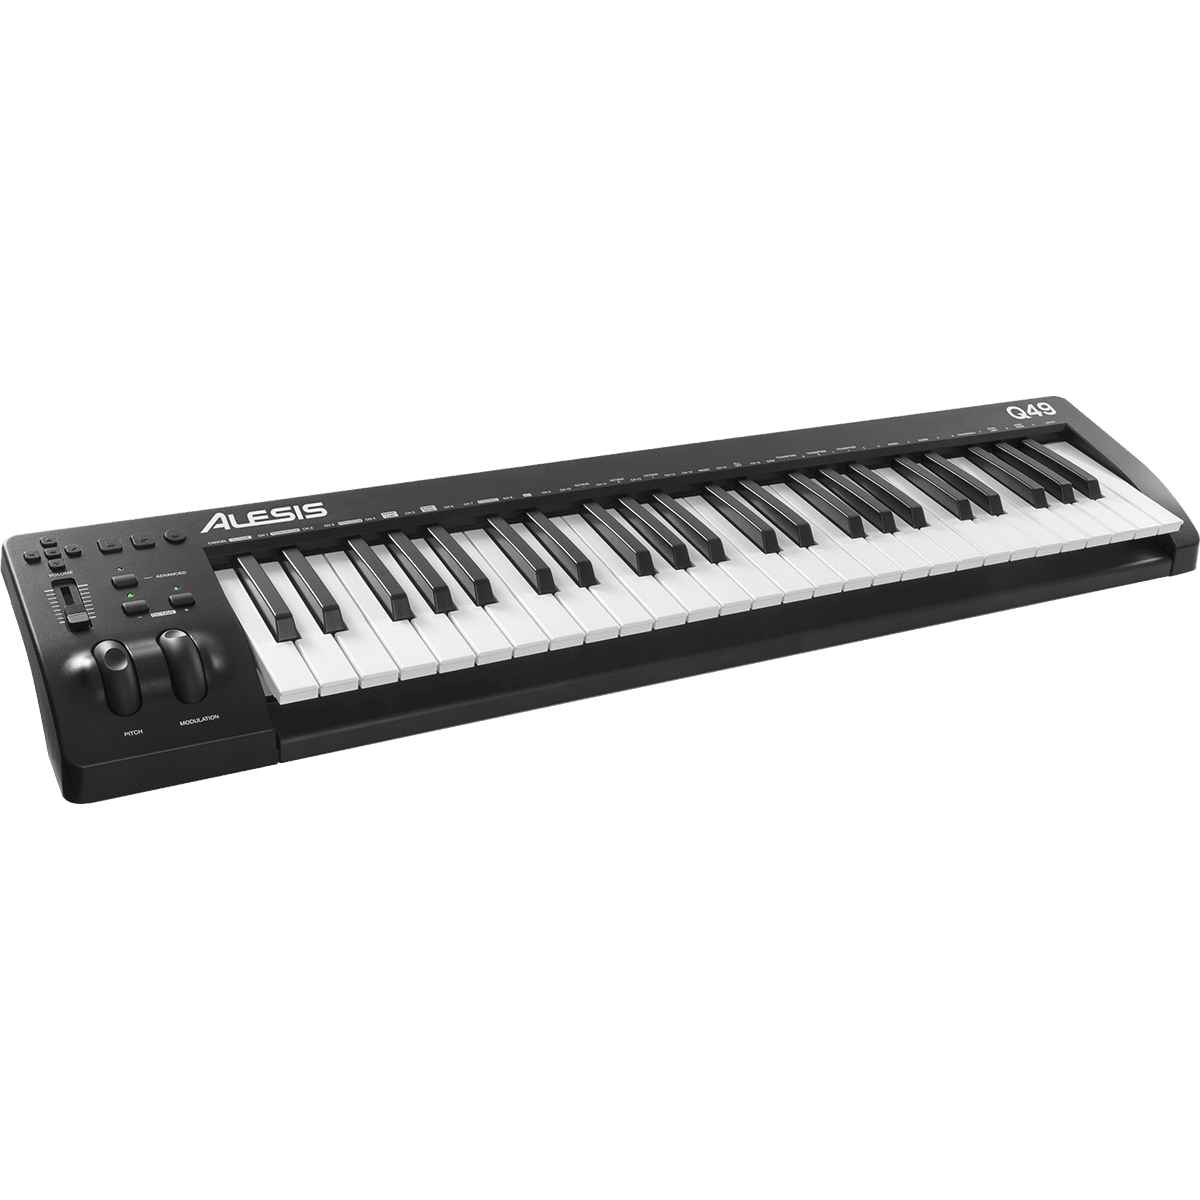 Claviers maitres 49 touches - Alesis - Q 49 MKII